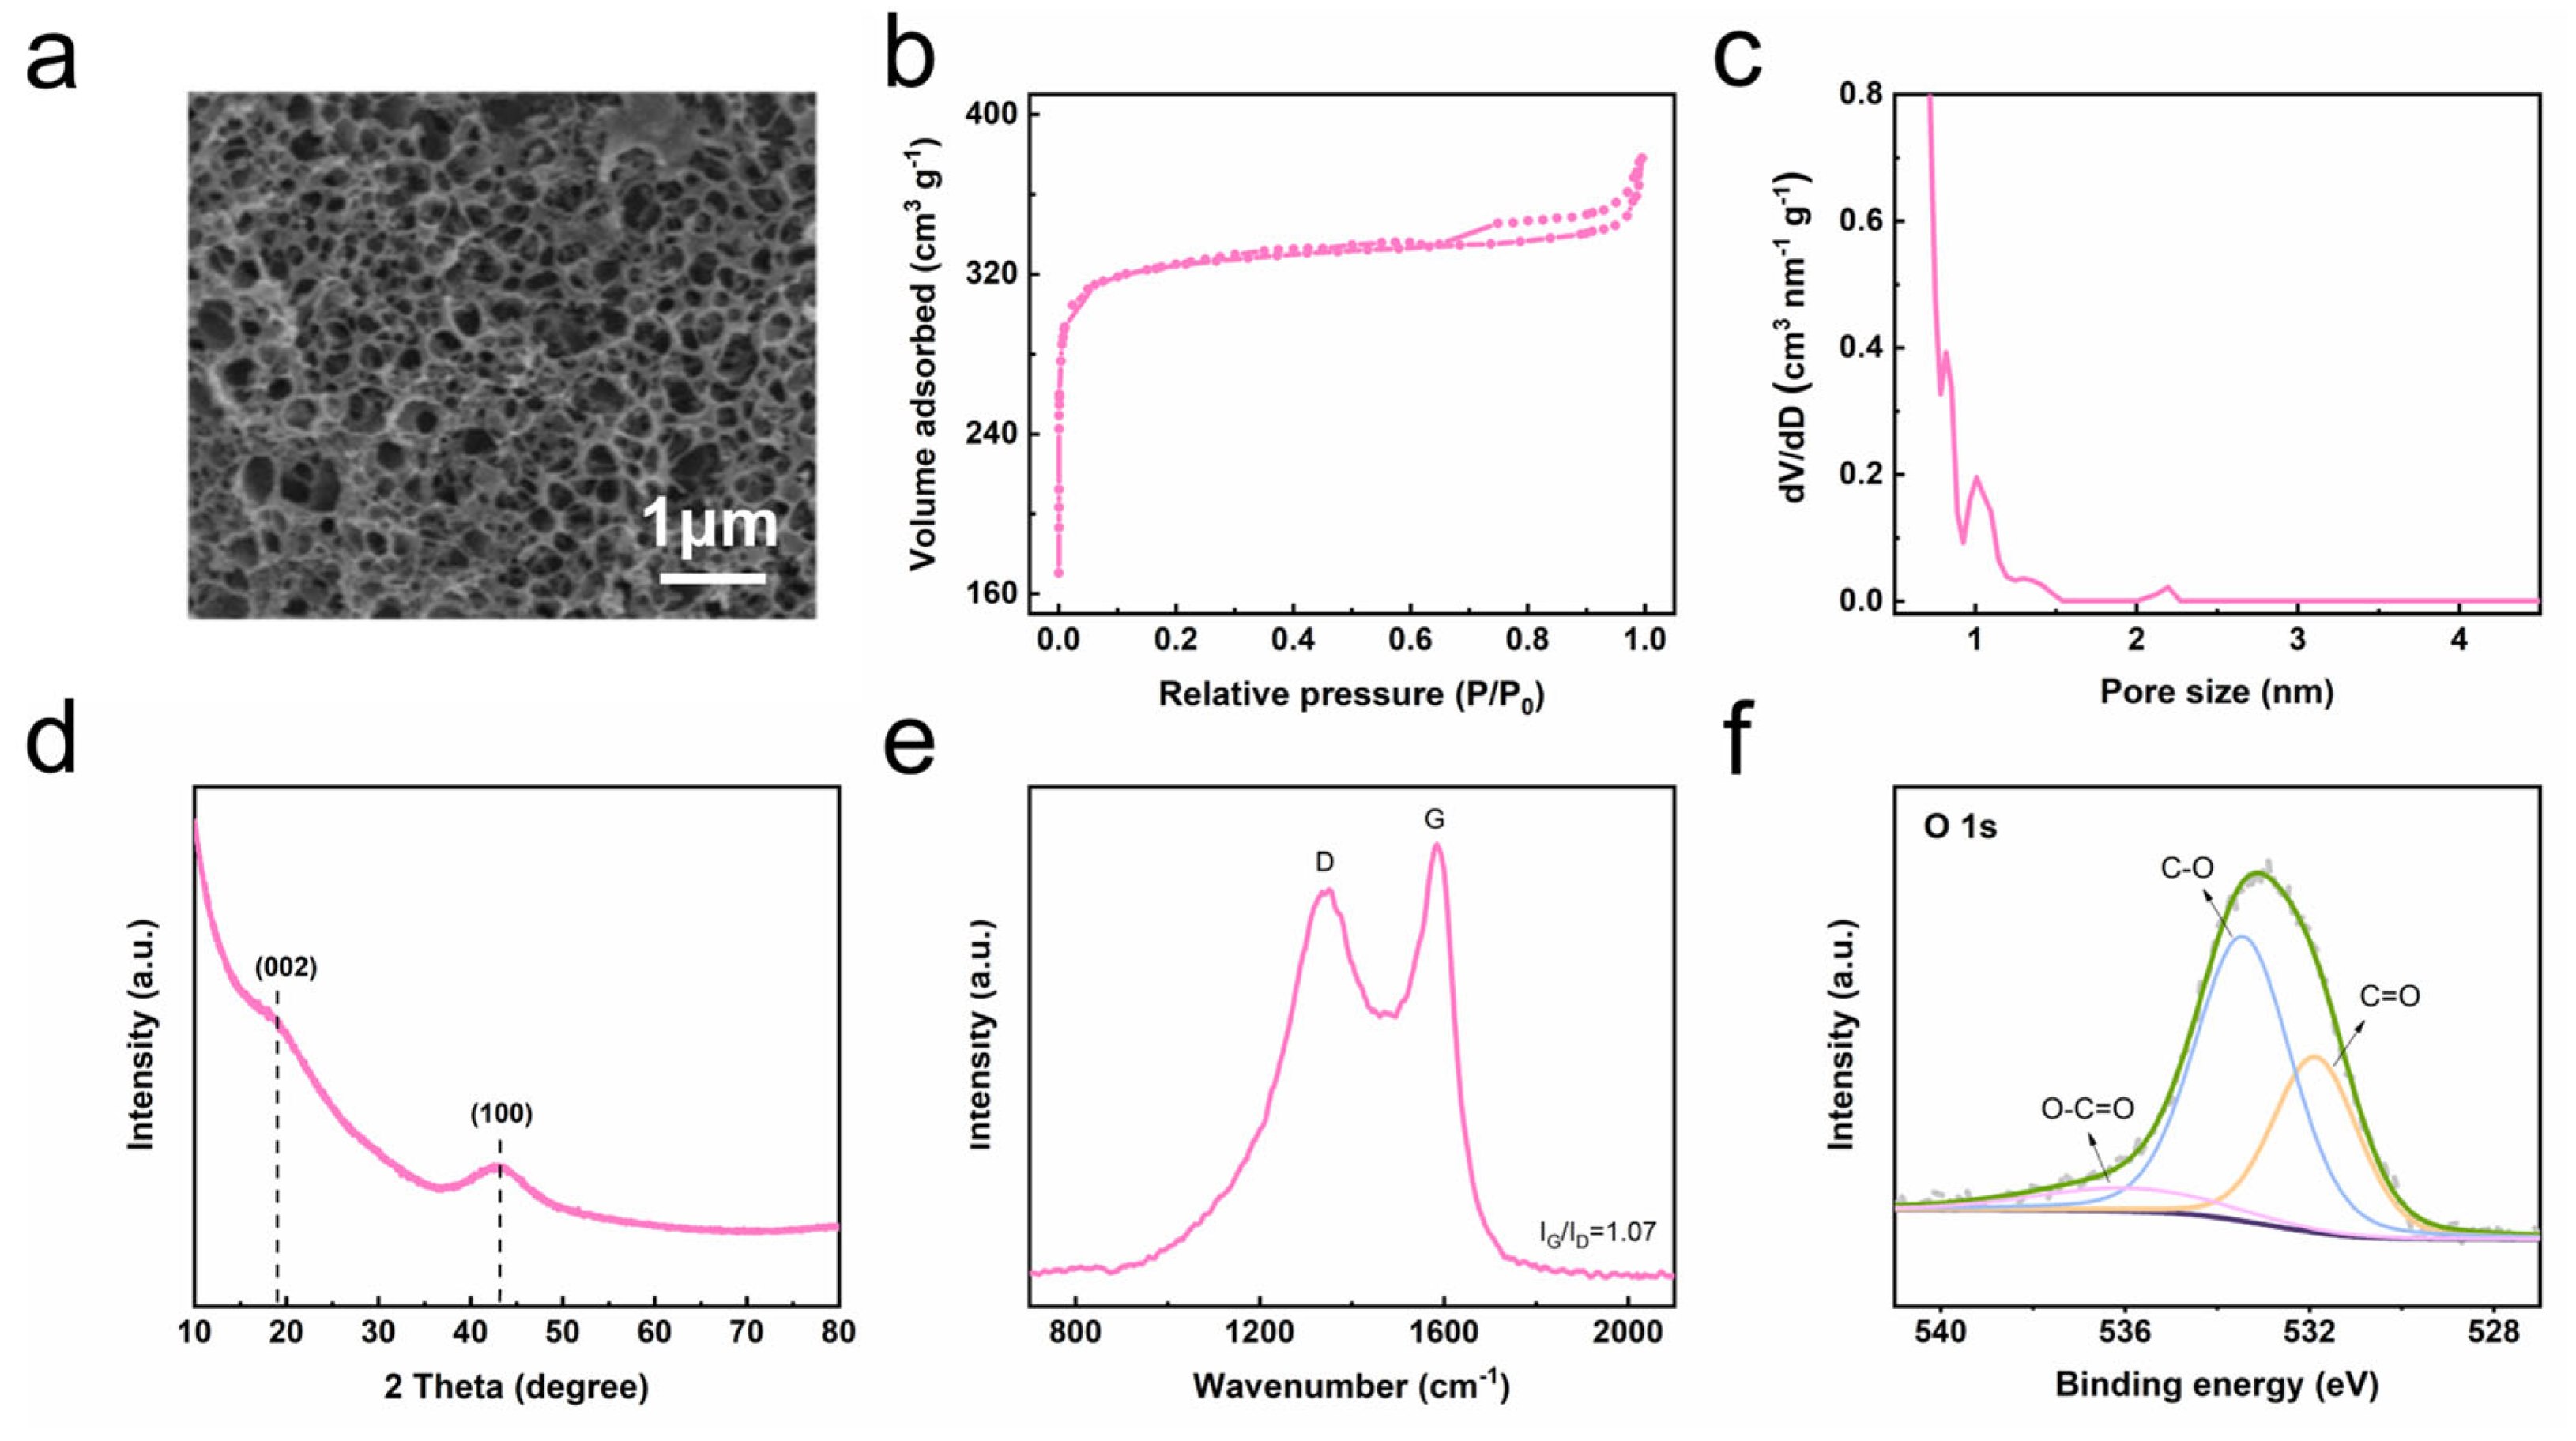 Cobalt-doped hierarchical porous carbon materials with spherical